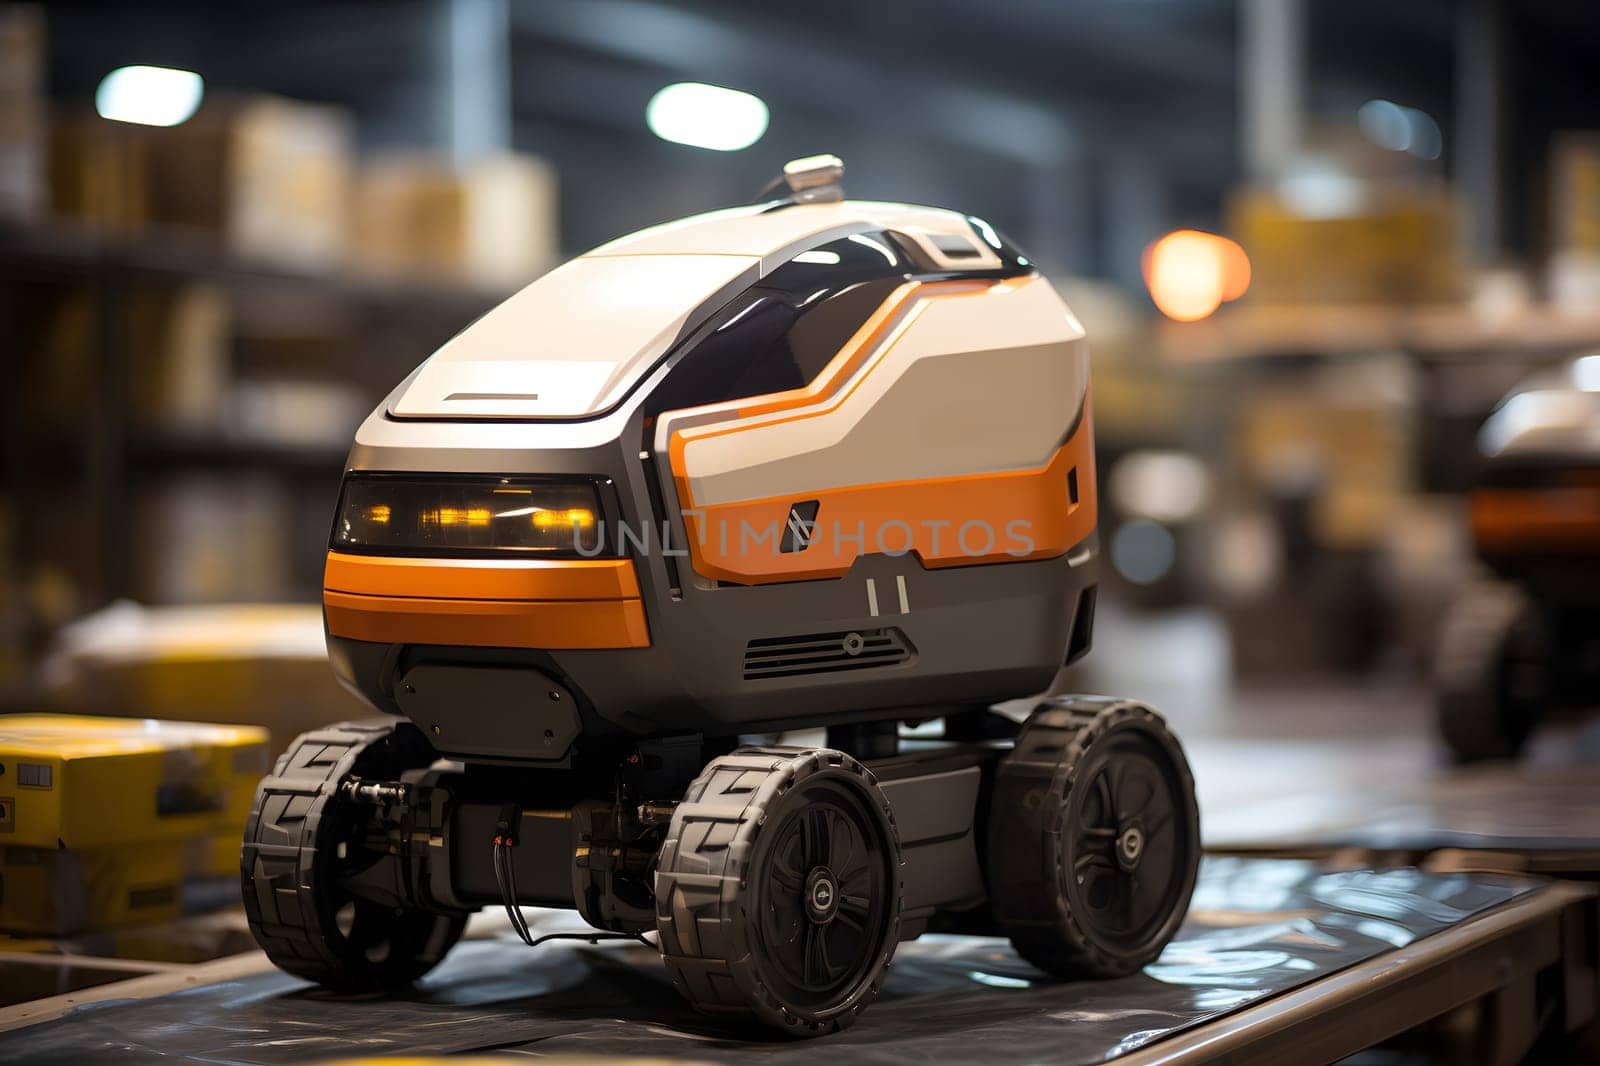 A robot is stationed on a conveyor belt in a warehouse handling automotive tires, wheels, and vehicles. It is responsible for moving items such as toys, treads, and bumpers for automotive design